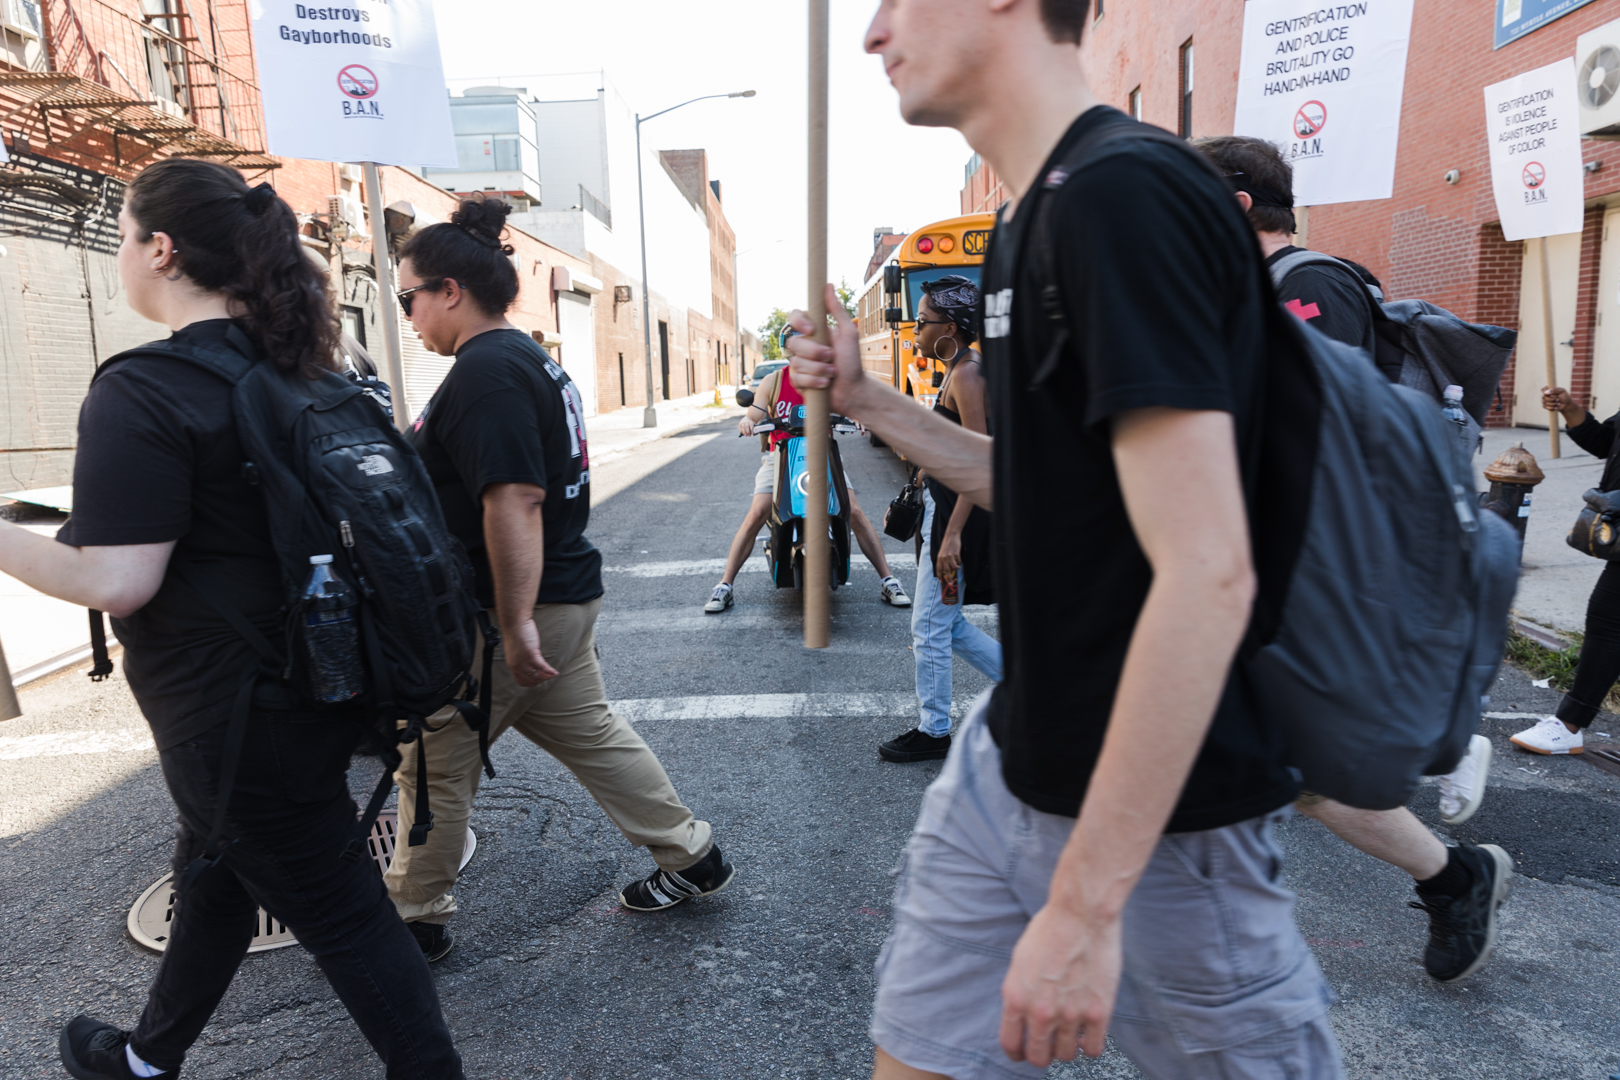 Marchers pass signs of Brooklyn’s gentrification. Eagle photo by Paul Frangipane